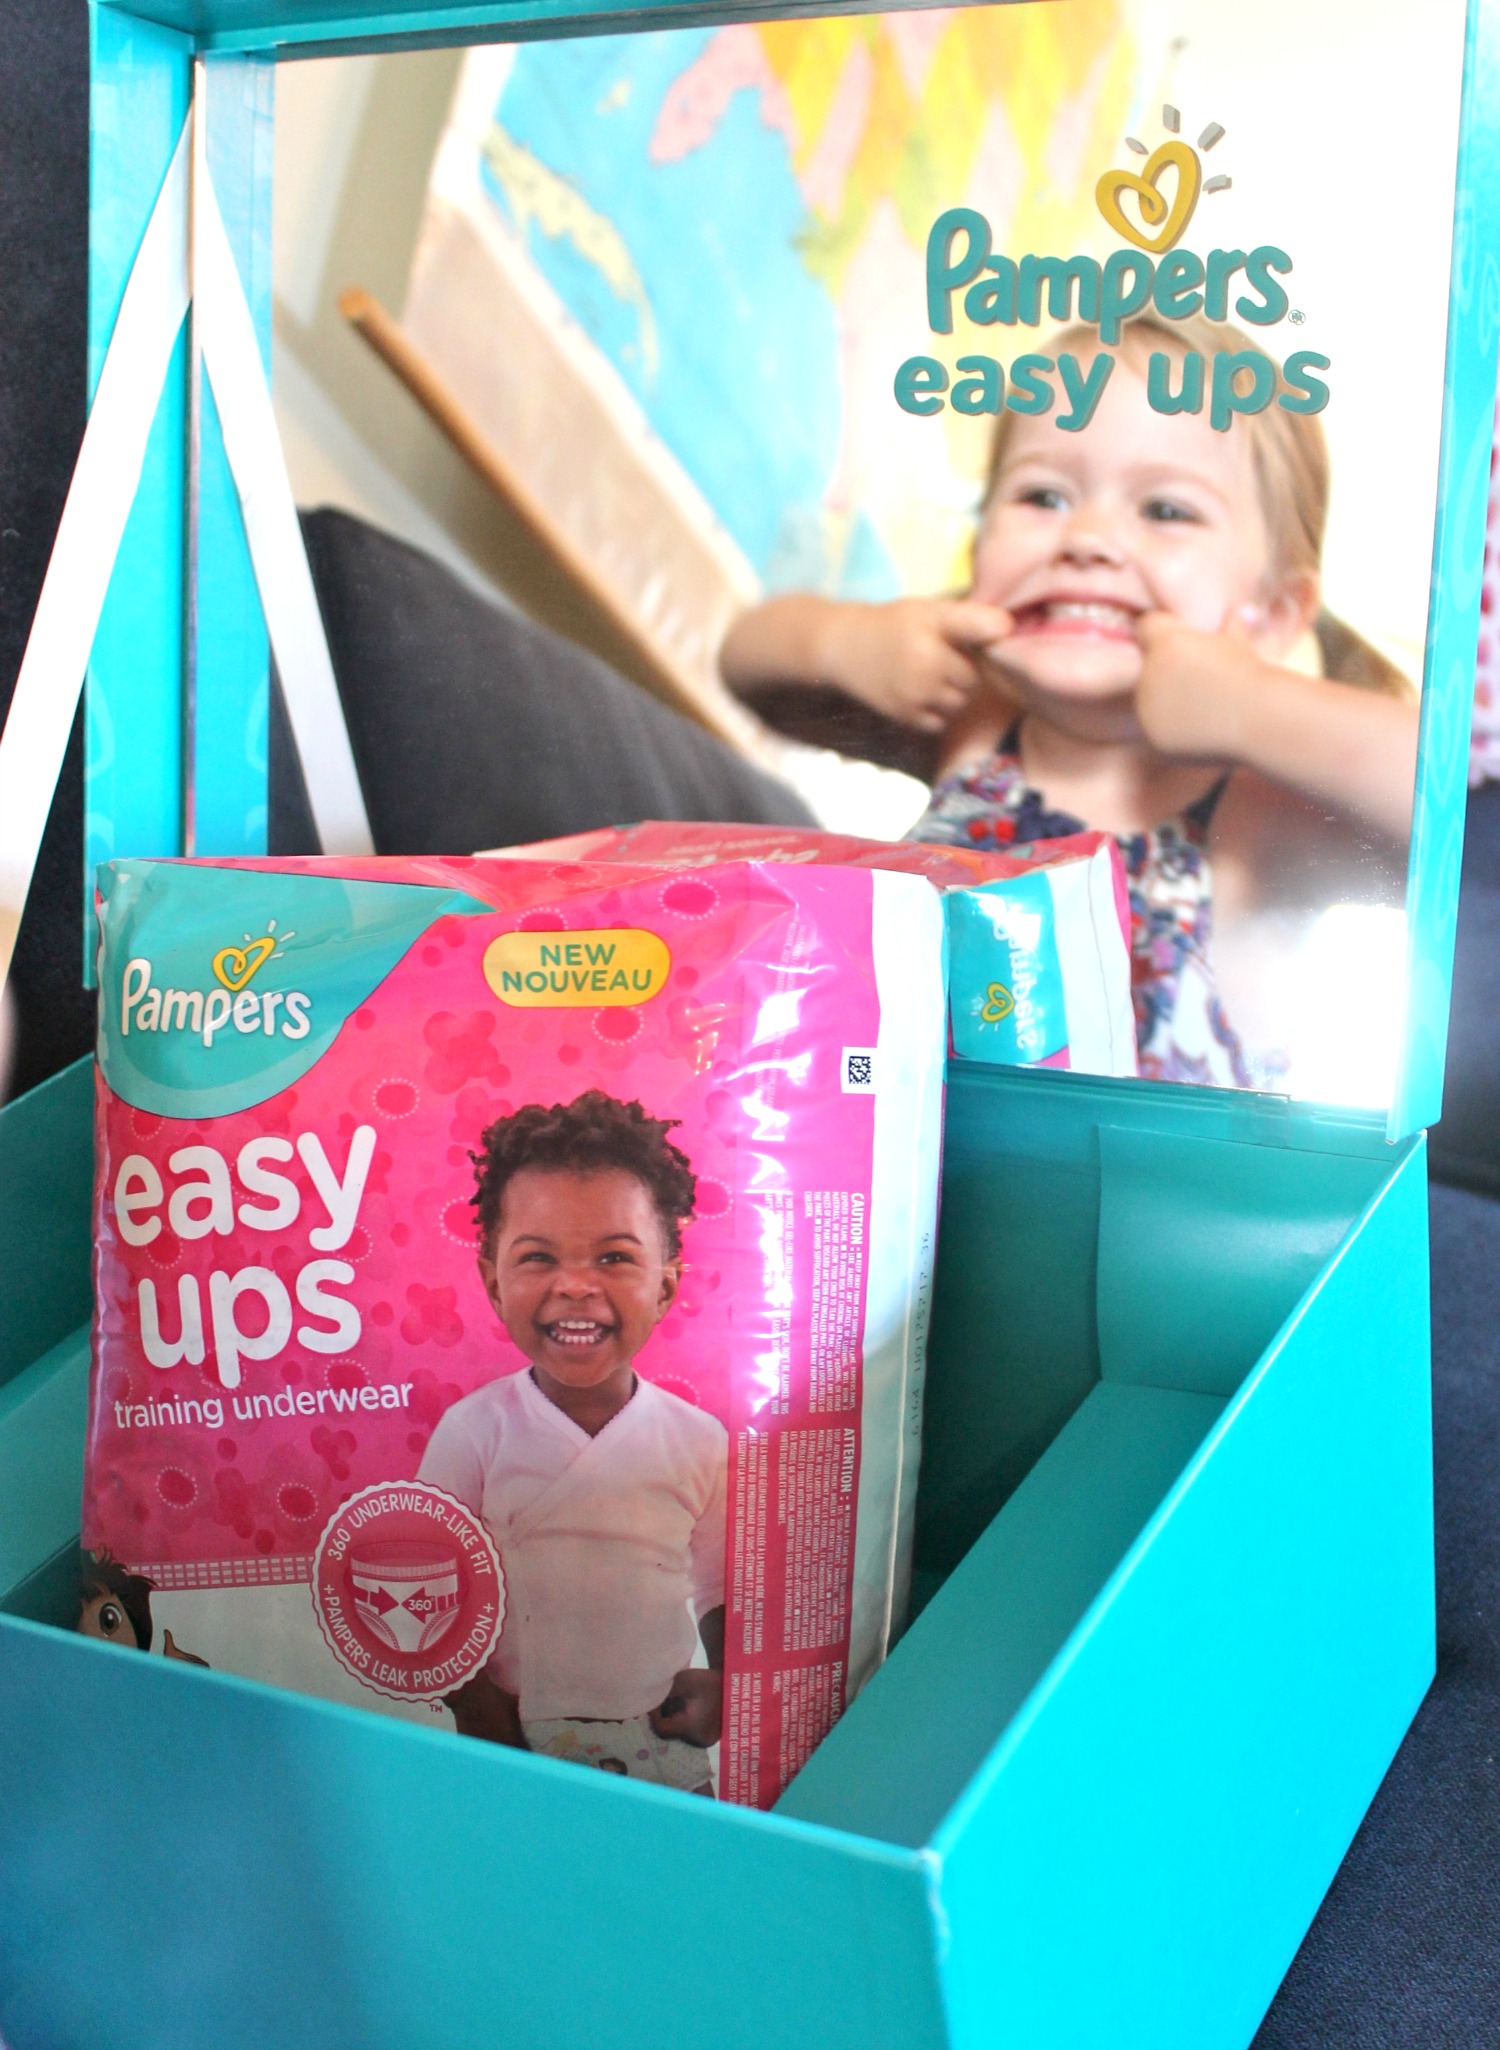 Have a toddler? Thinking about potty training? Here are some signs that I knew my toddler was ready for Pampers Easy Ups.